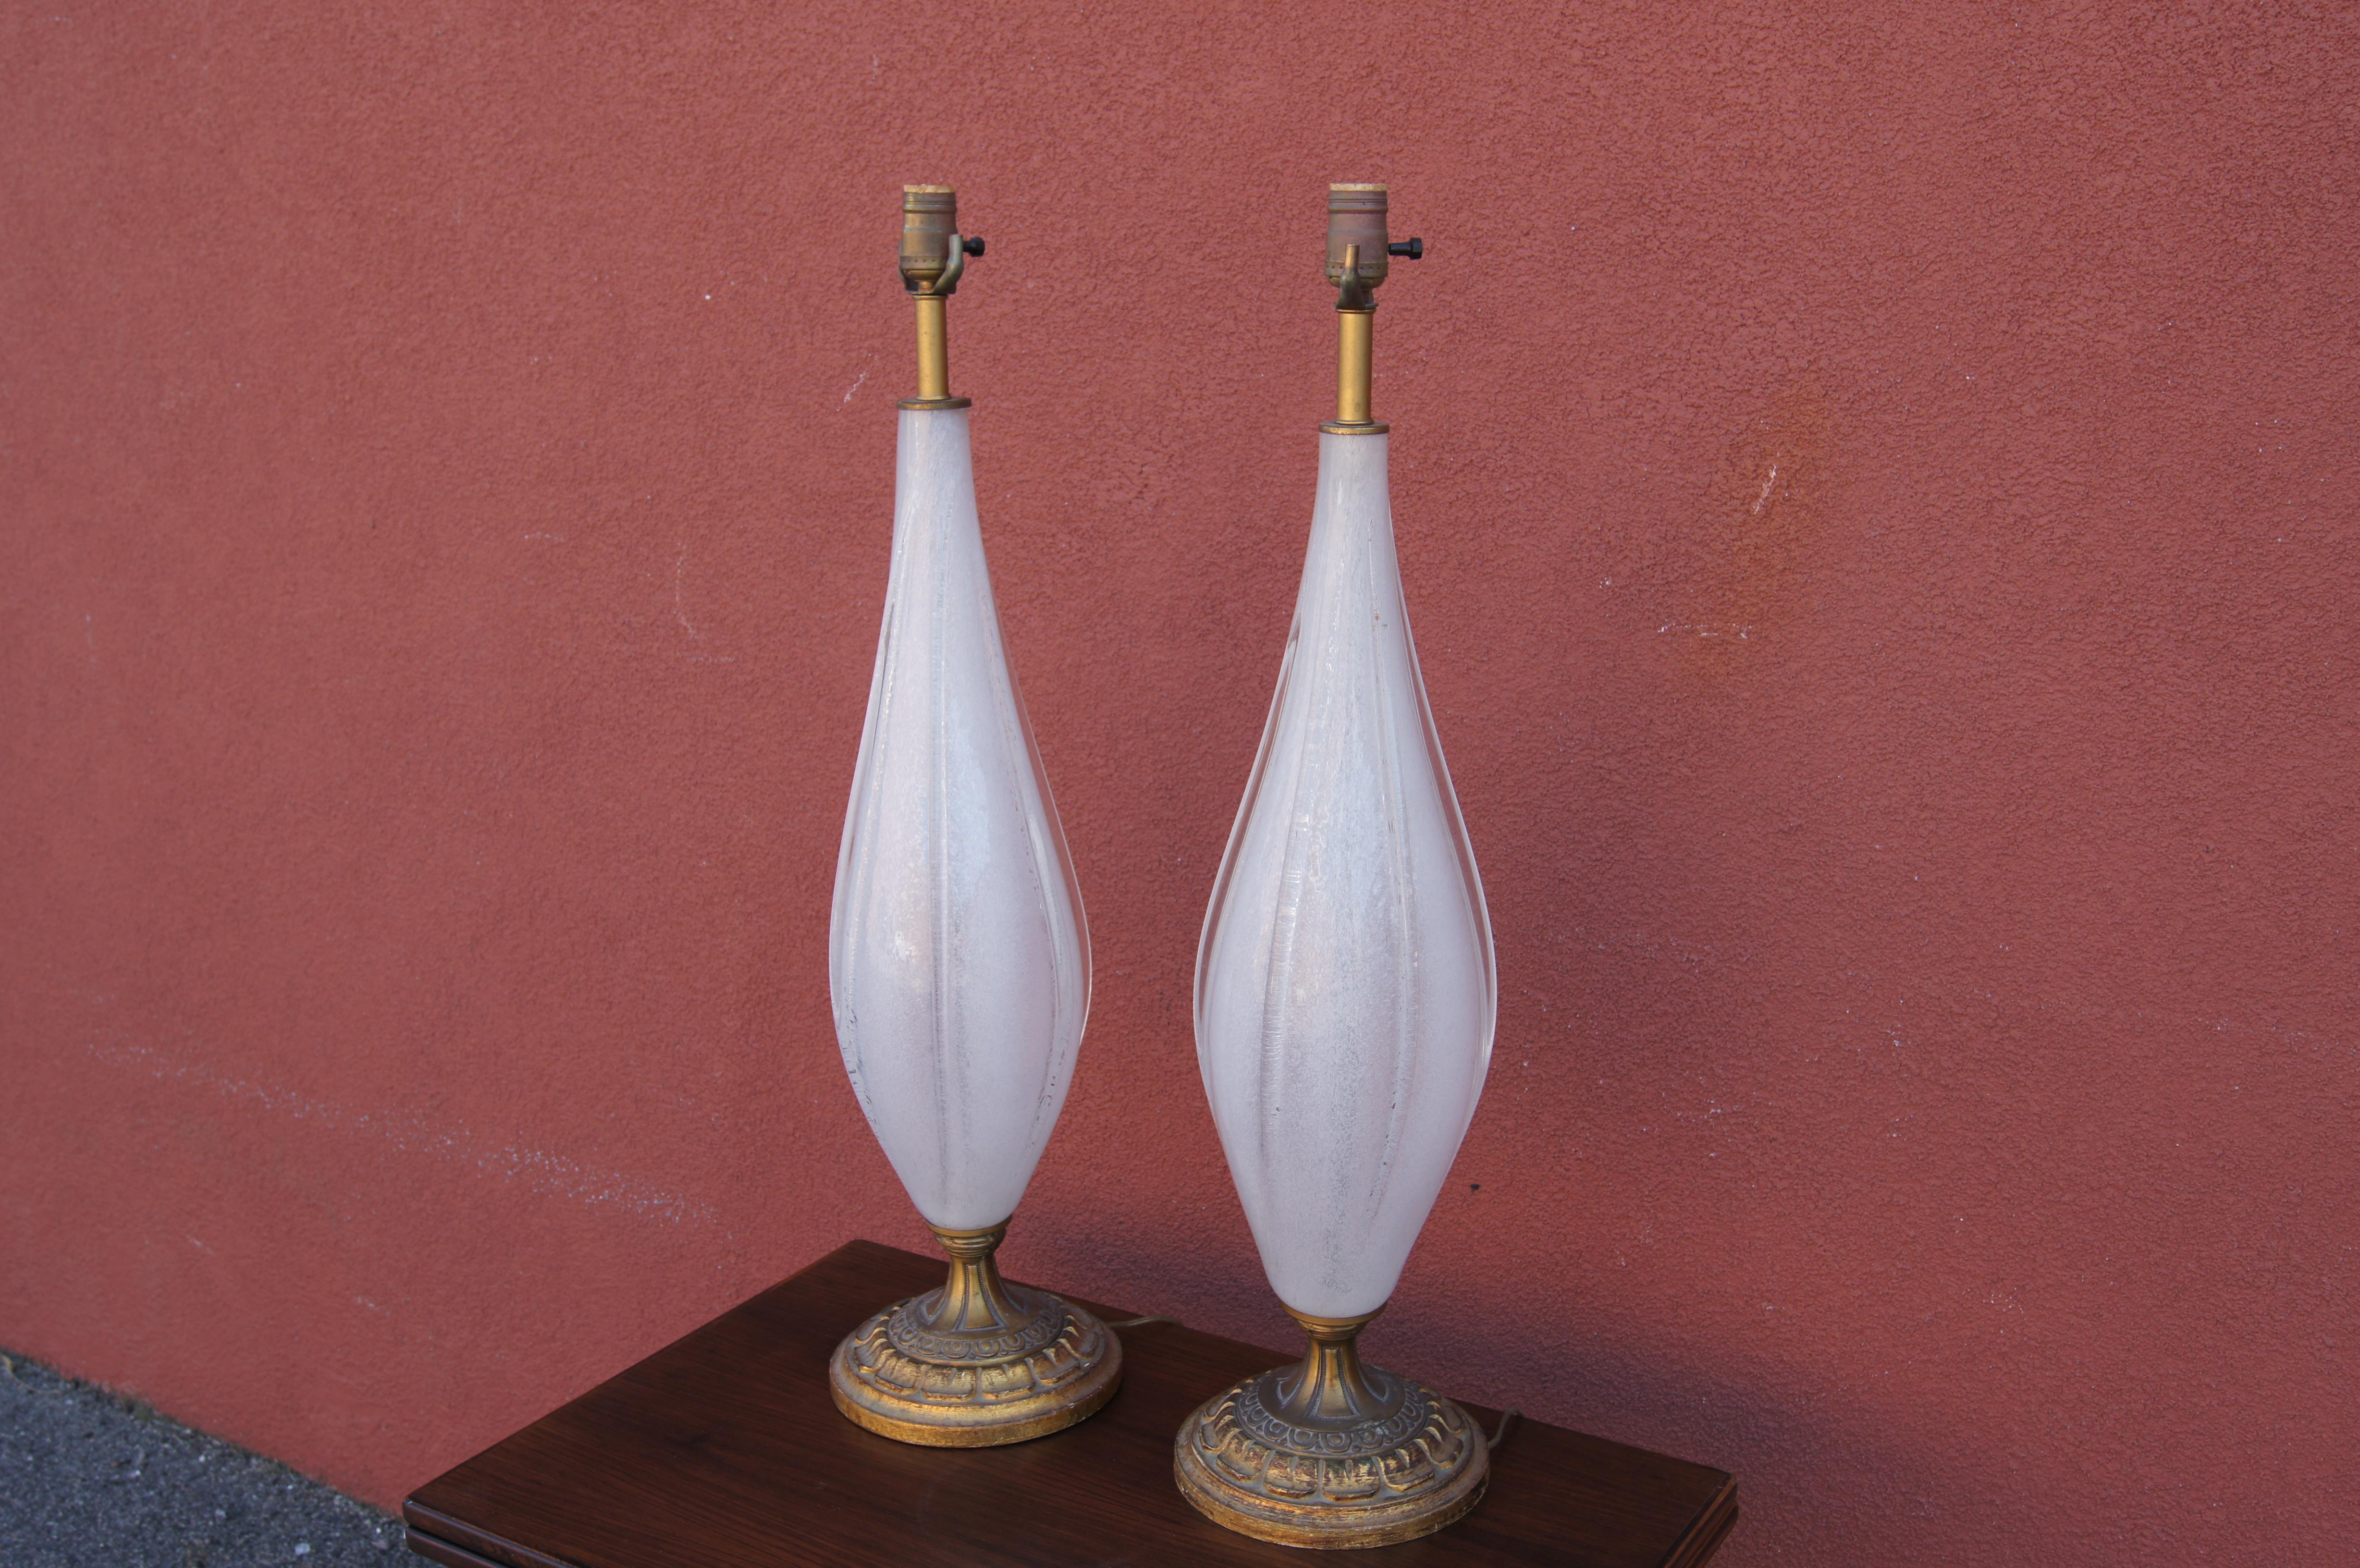 This slender pair of Italian table lamps features handblown white Murano glass drops on carved wooden bases tinted gold.

Sold without shades.